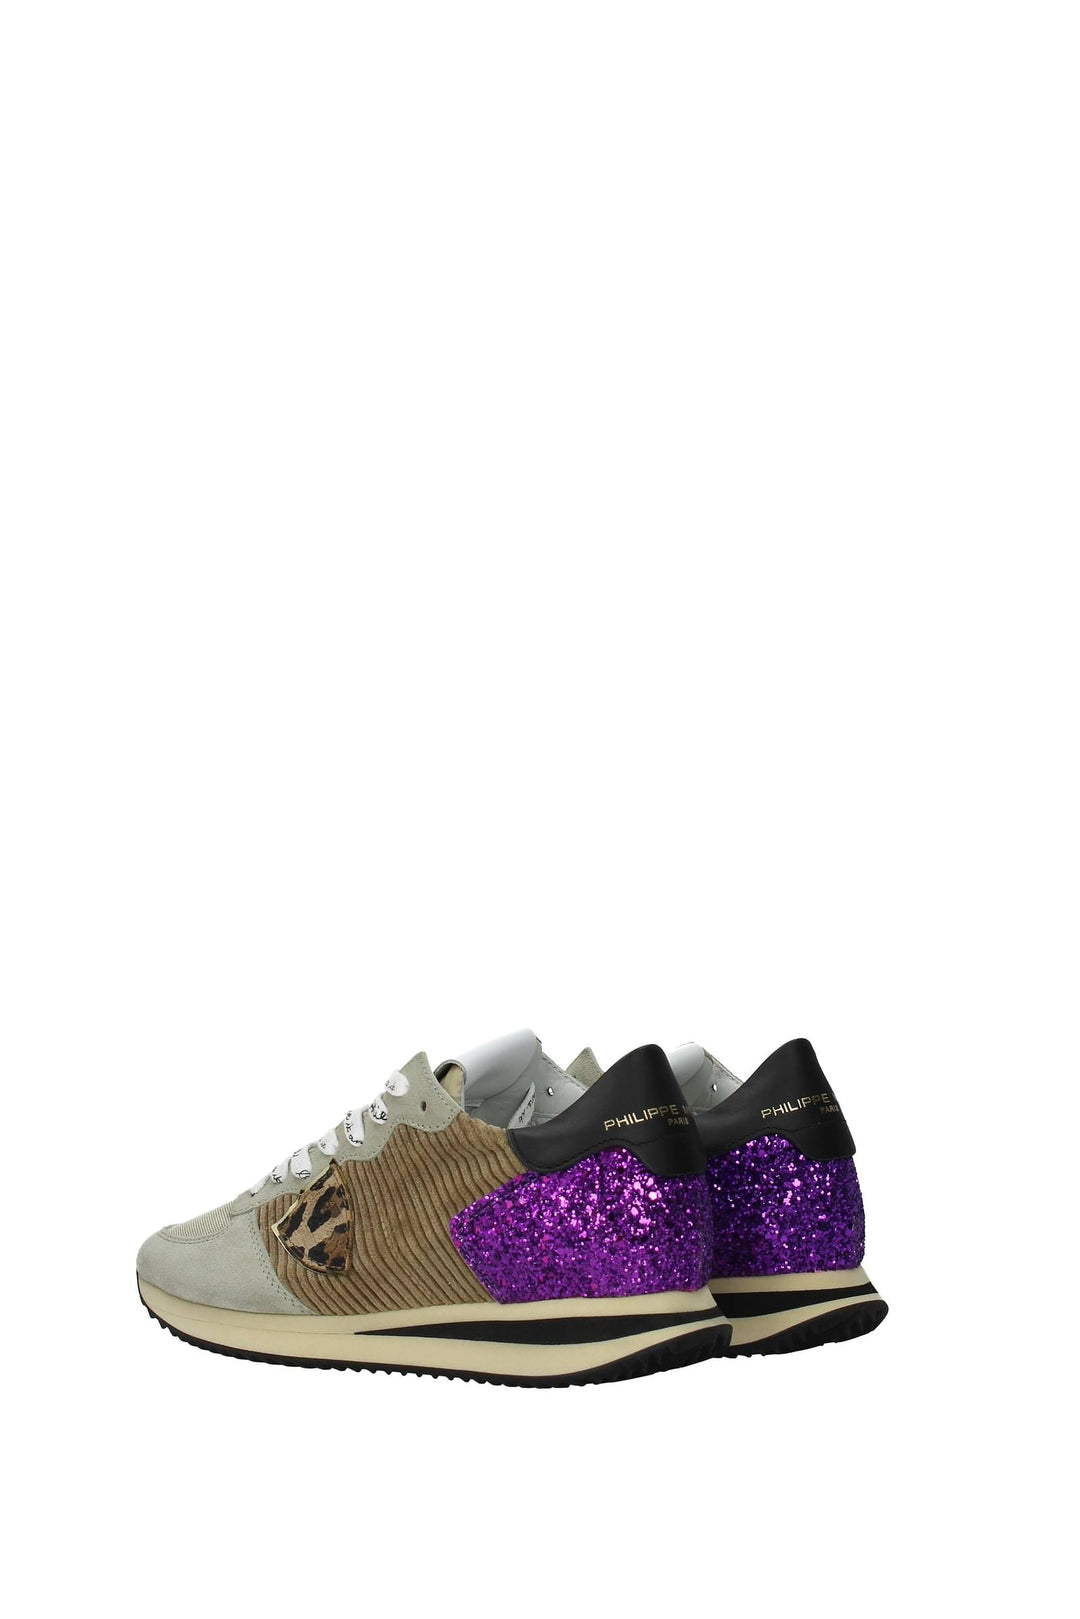 Sneakers Velluto Beige Fuxia - Philippe Model - Donna